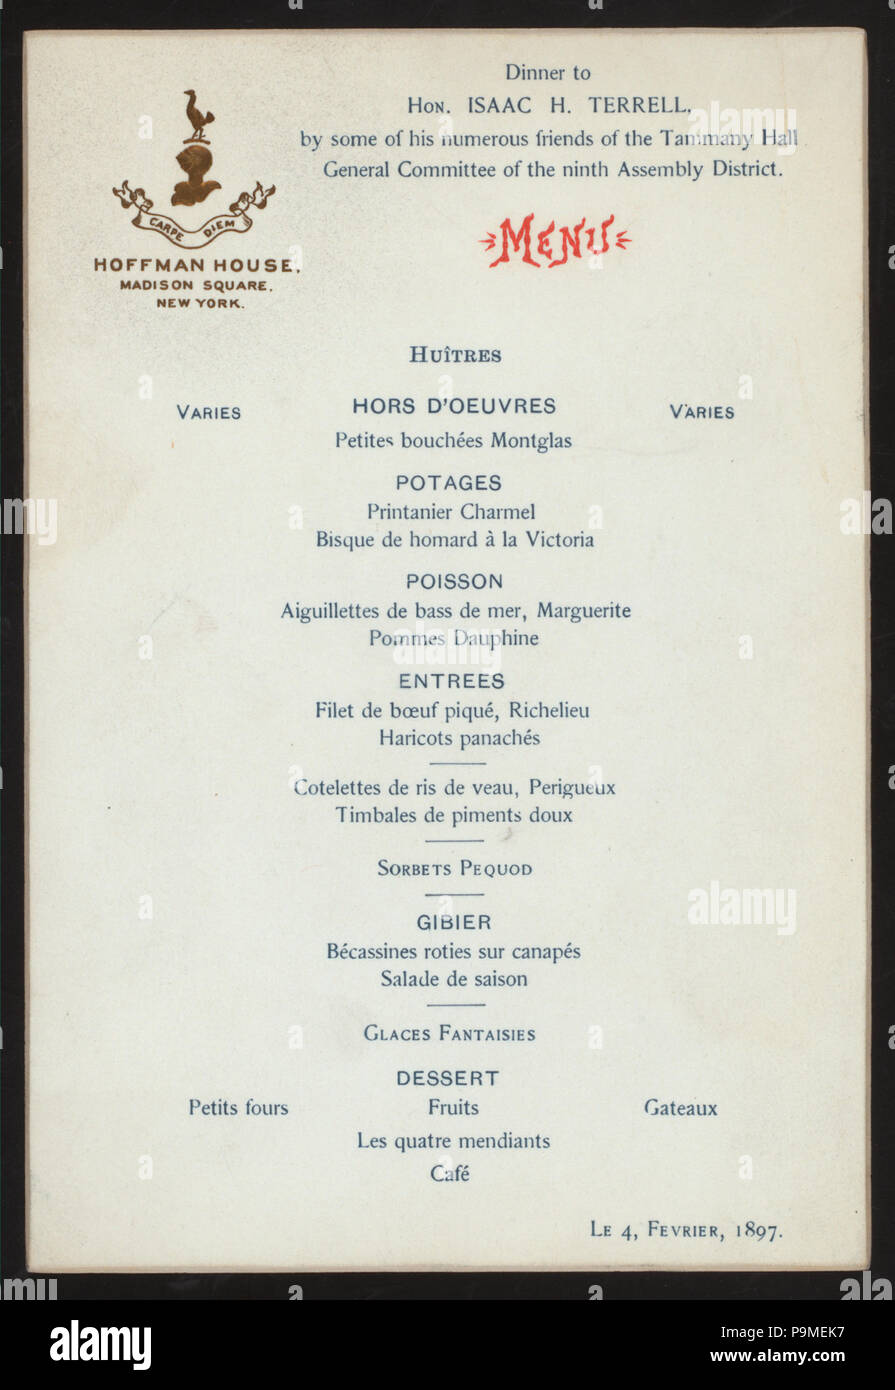 574 DINNER TO HON.ISAAC H. TERRELL (held by) TAMMANY HALL GENERAL COMMITTEE OF THE NINTH ASSEMBLY DISTRICT (at) &quot;HOFFMAN HOUSE,NEW YORK, NY&quot; (HOTEL;) (NYPL Hades-270865-470573) Stock Photo